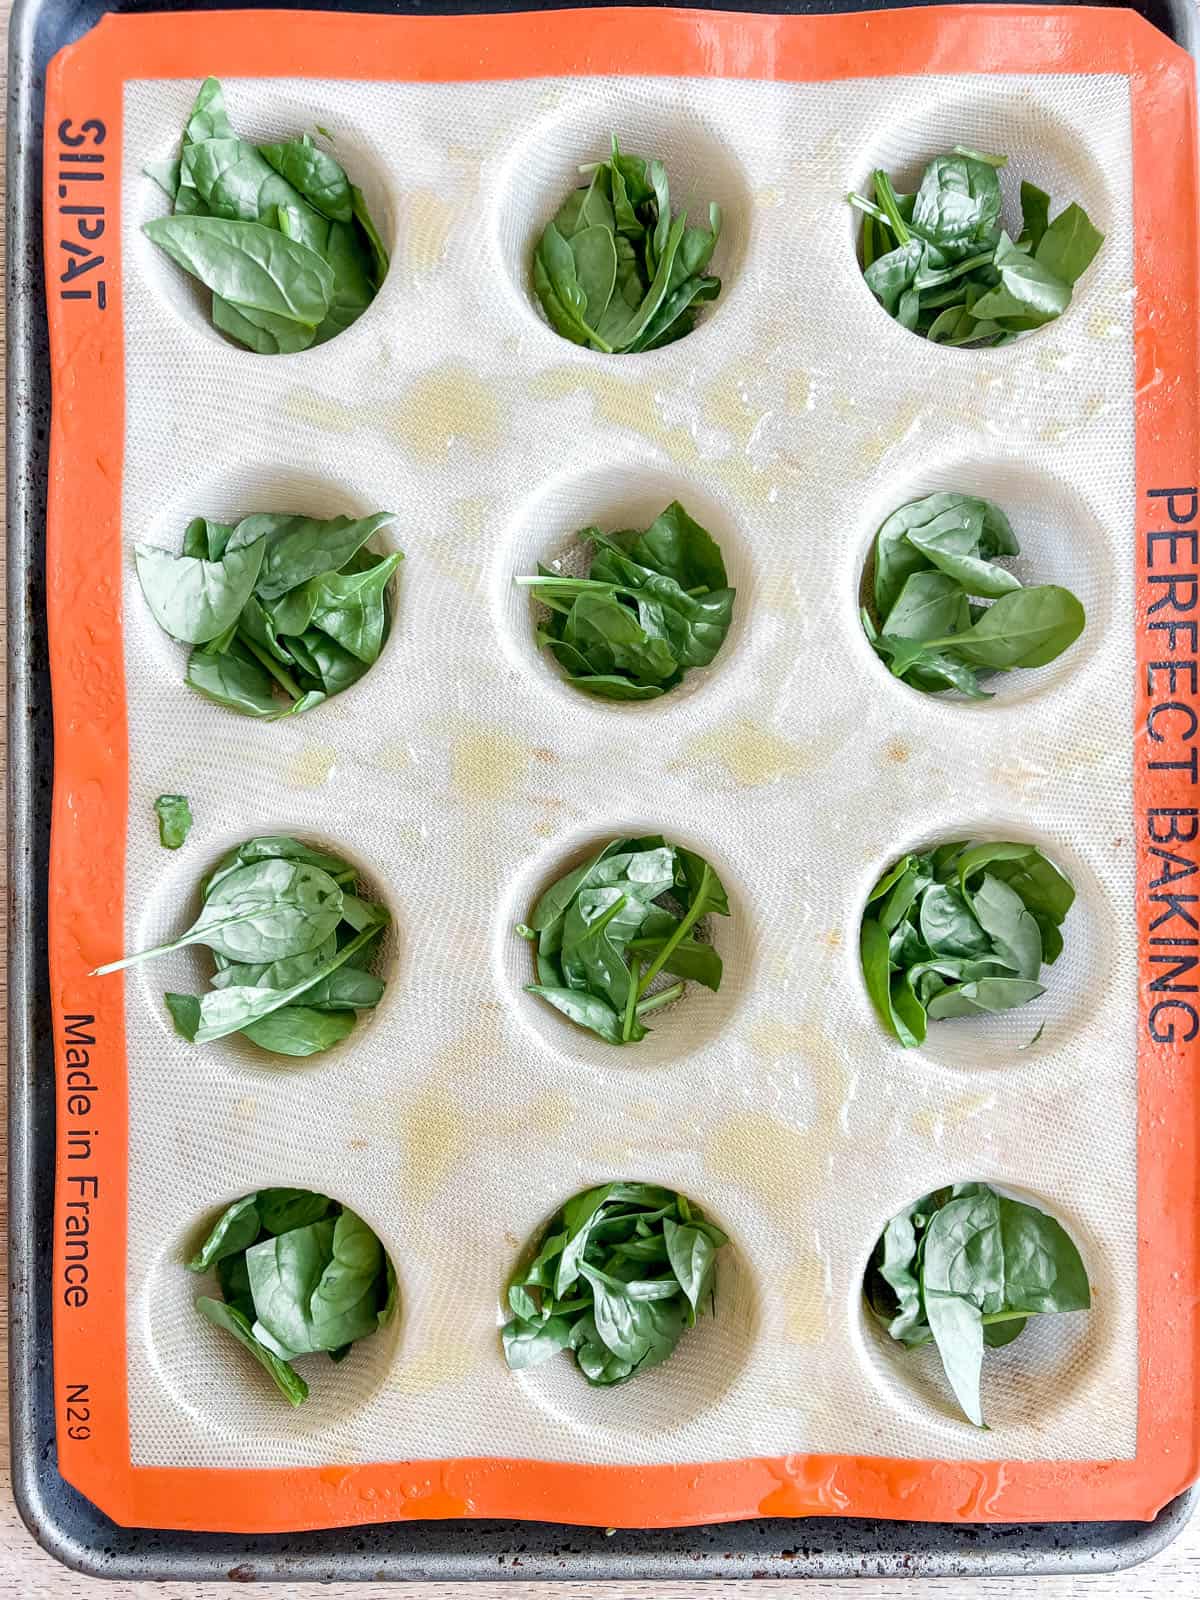 Chopped spinach added to muffin tins.